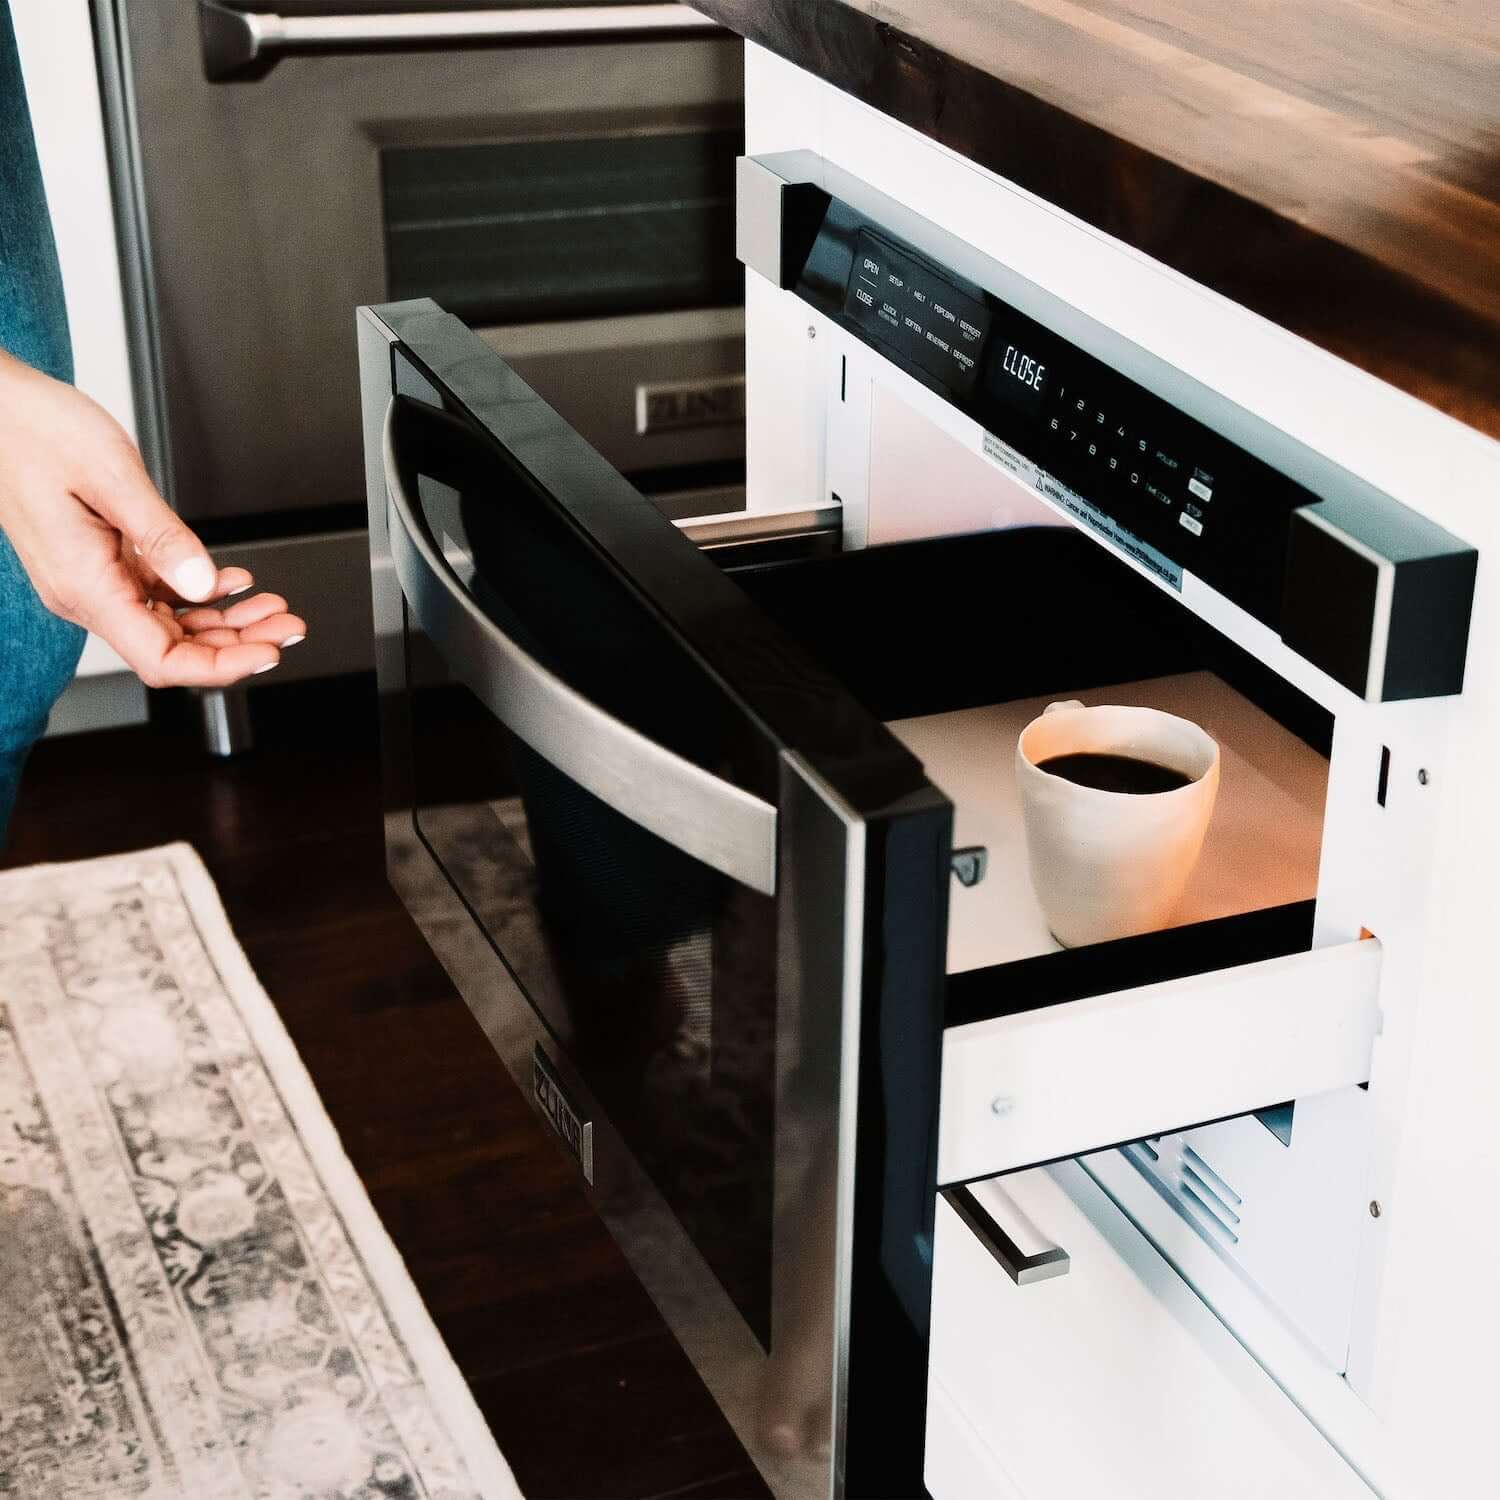 Built- in microwave drawer with a cup of coffee inside being opened.